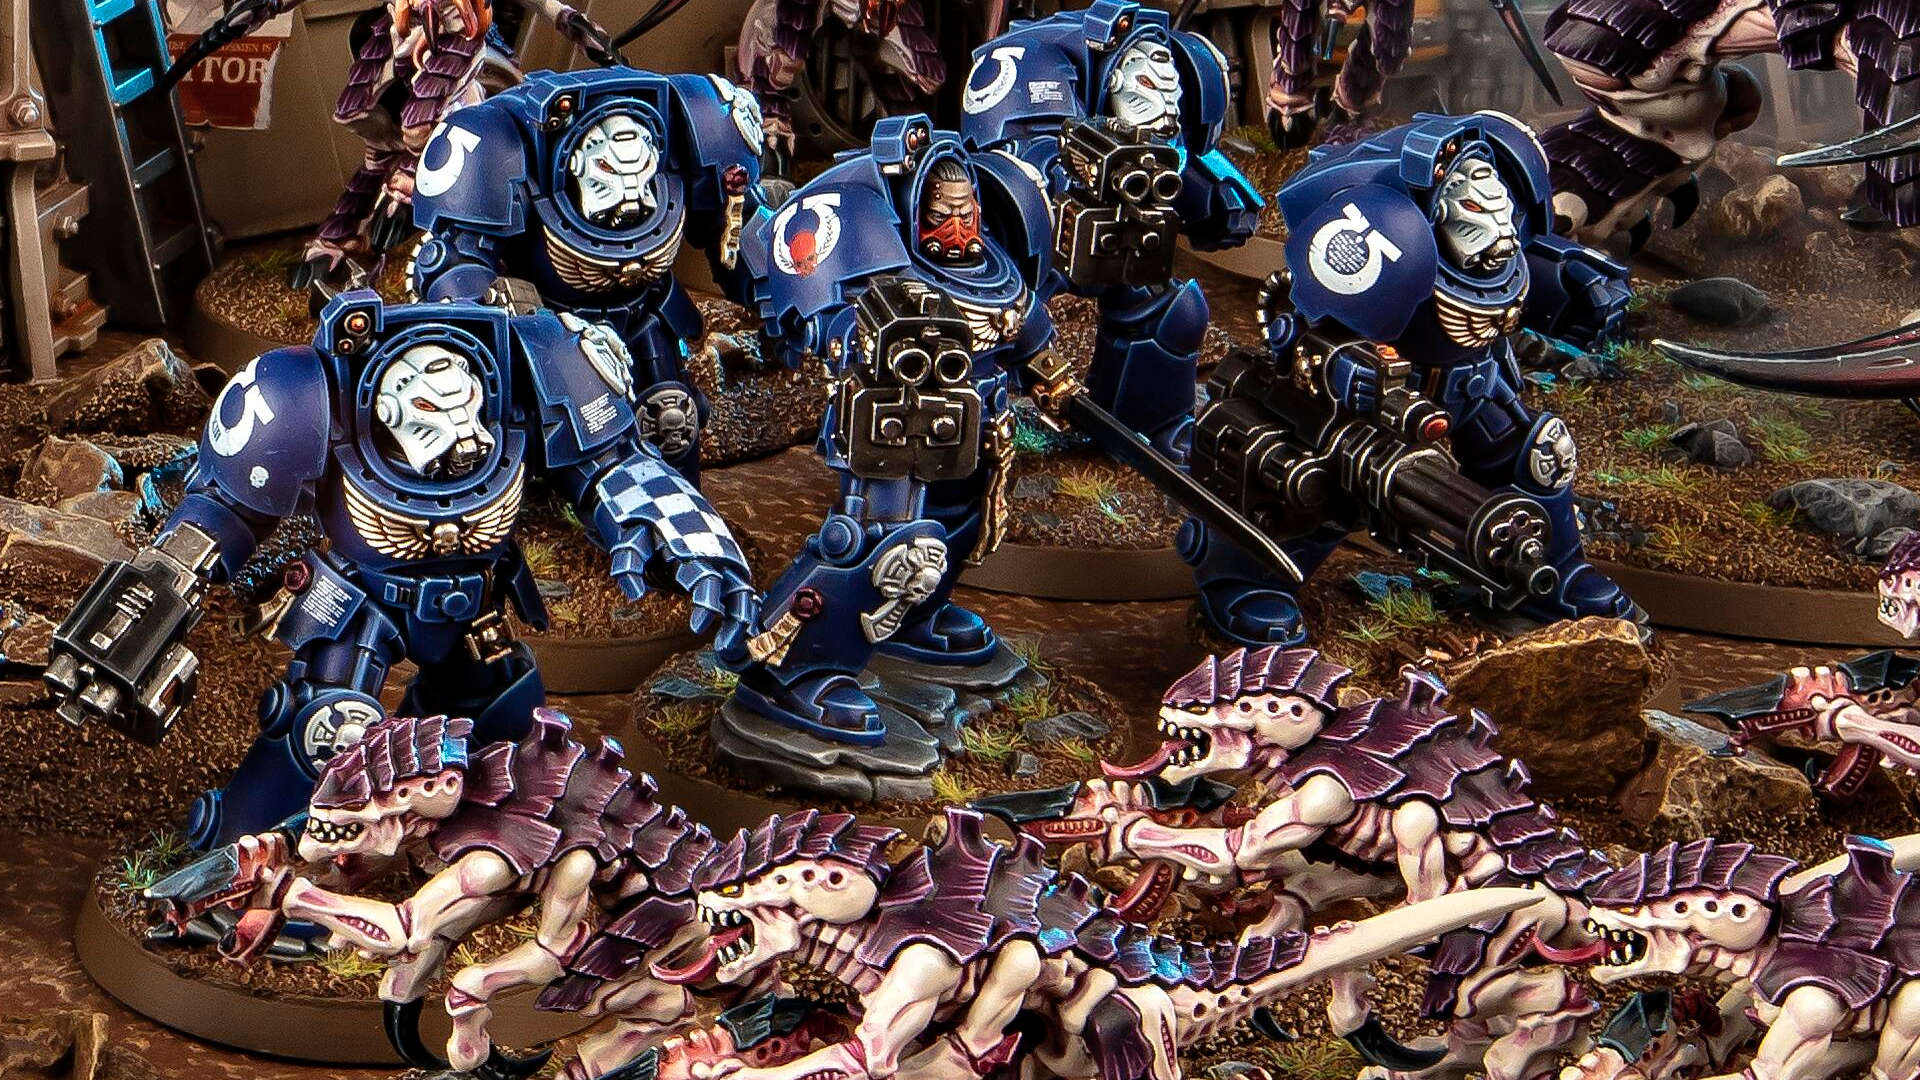 Interview with Warhammer 40k studio manager Stuart Black about Warhammer 40k 10th edition - product photo by Games Workshop of a heavily armoured Space Marine terminator squad